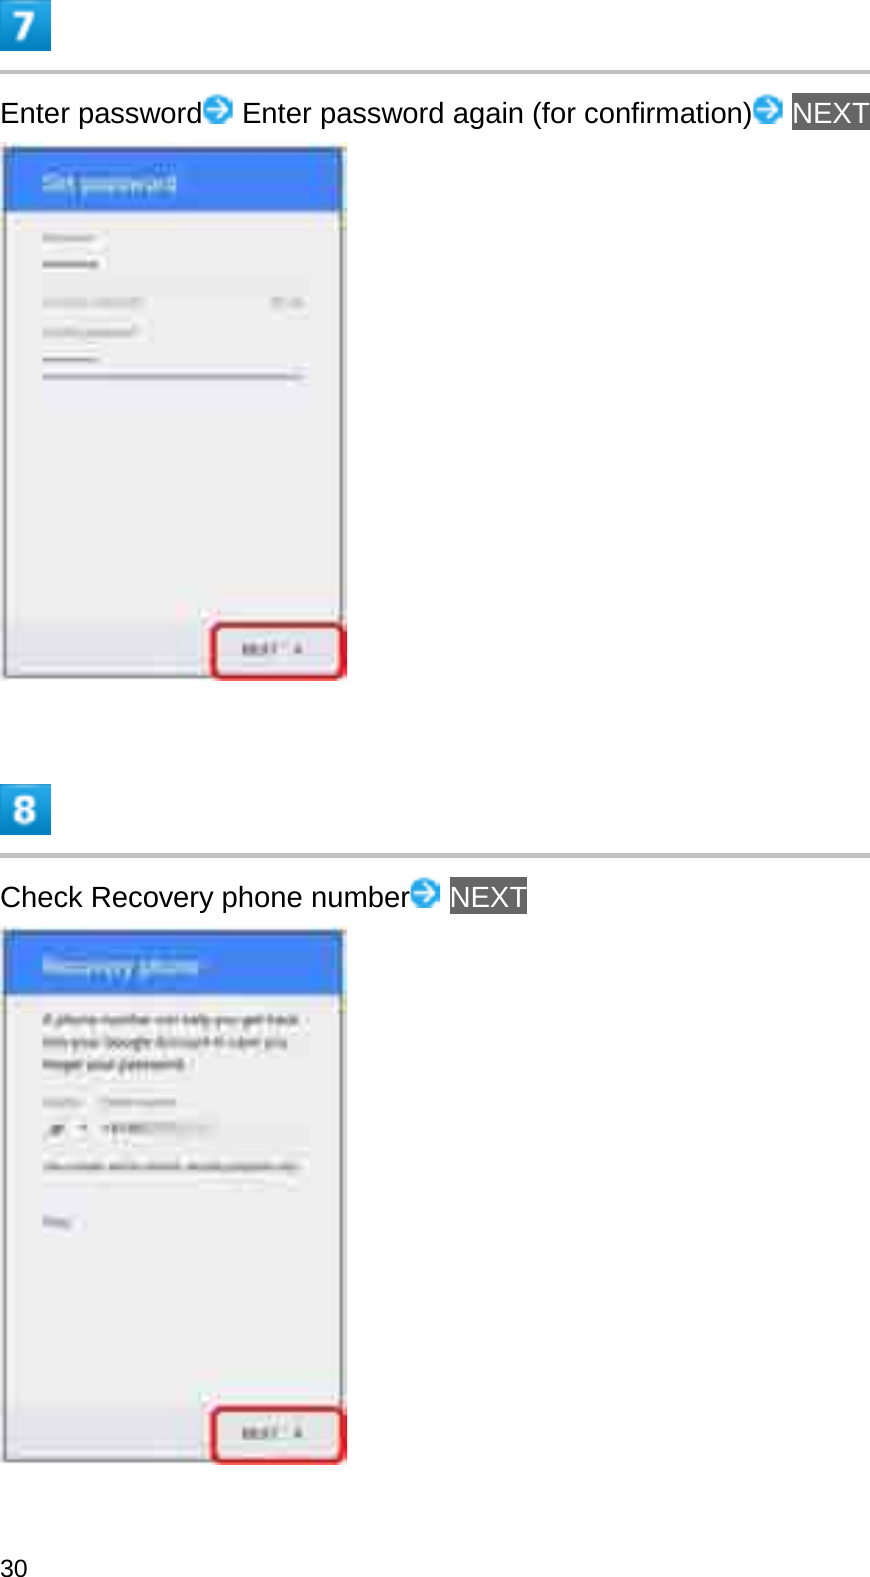 Enter password Enter password again (for confirmation) NEXTCheck Recovery phone number NEXT30